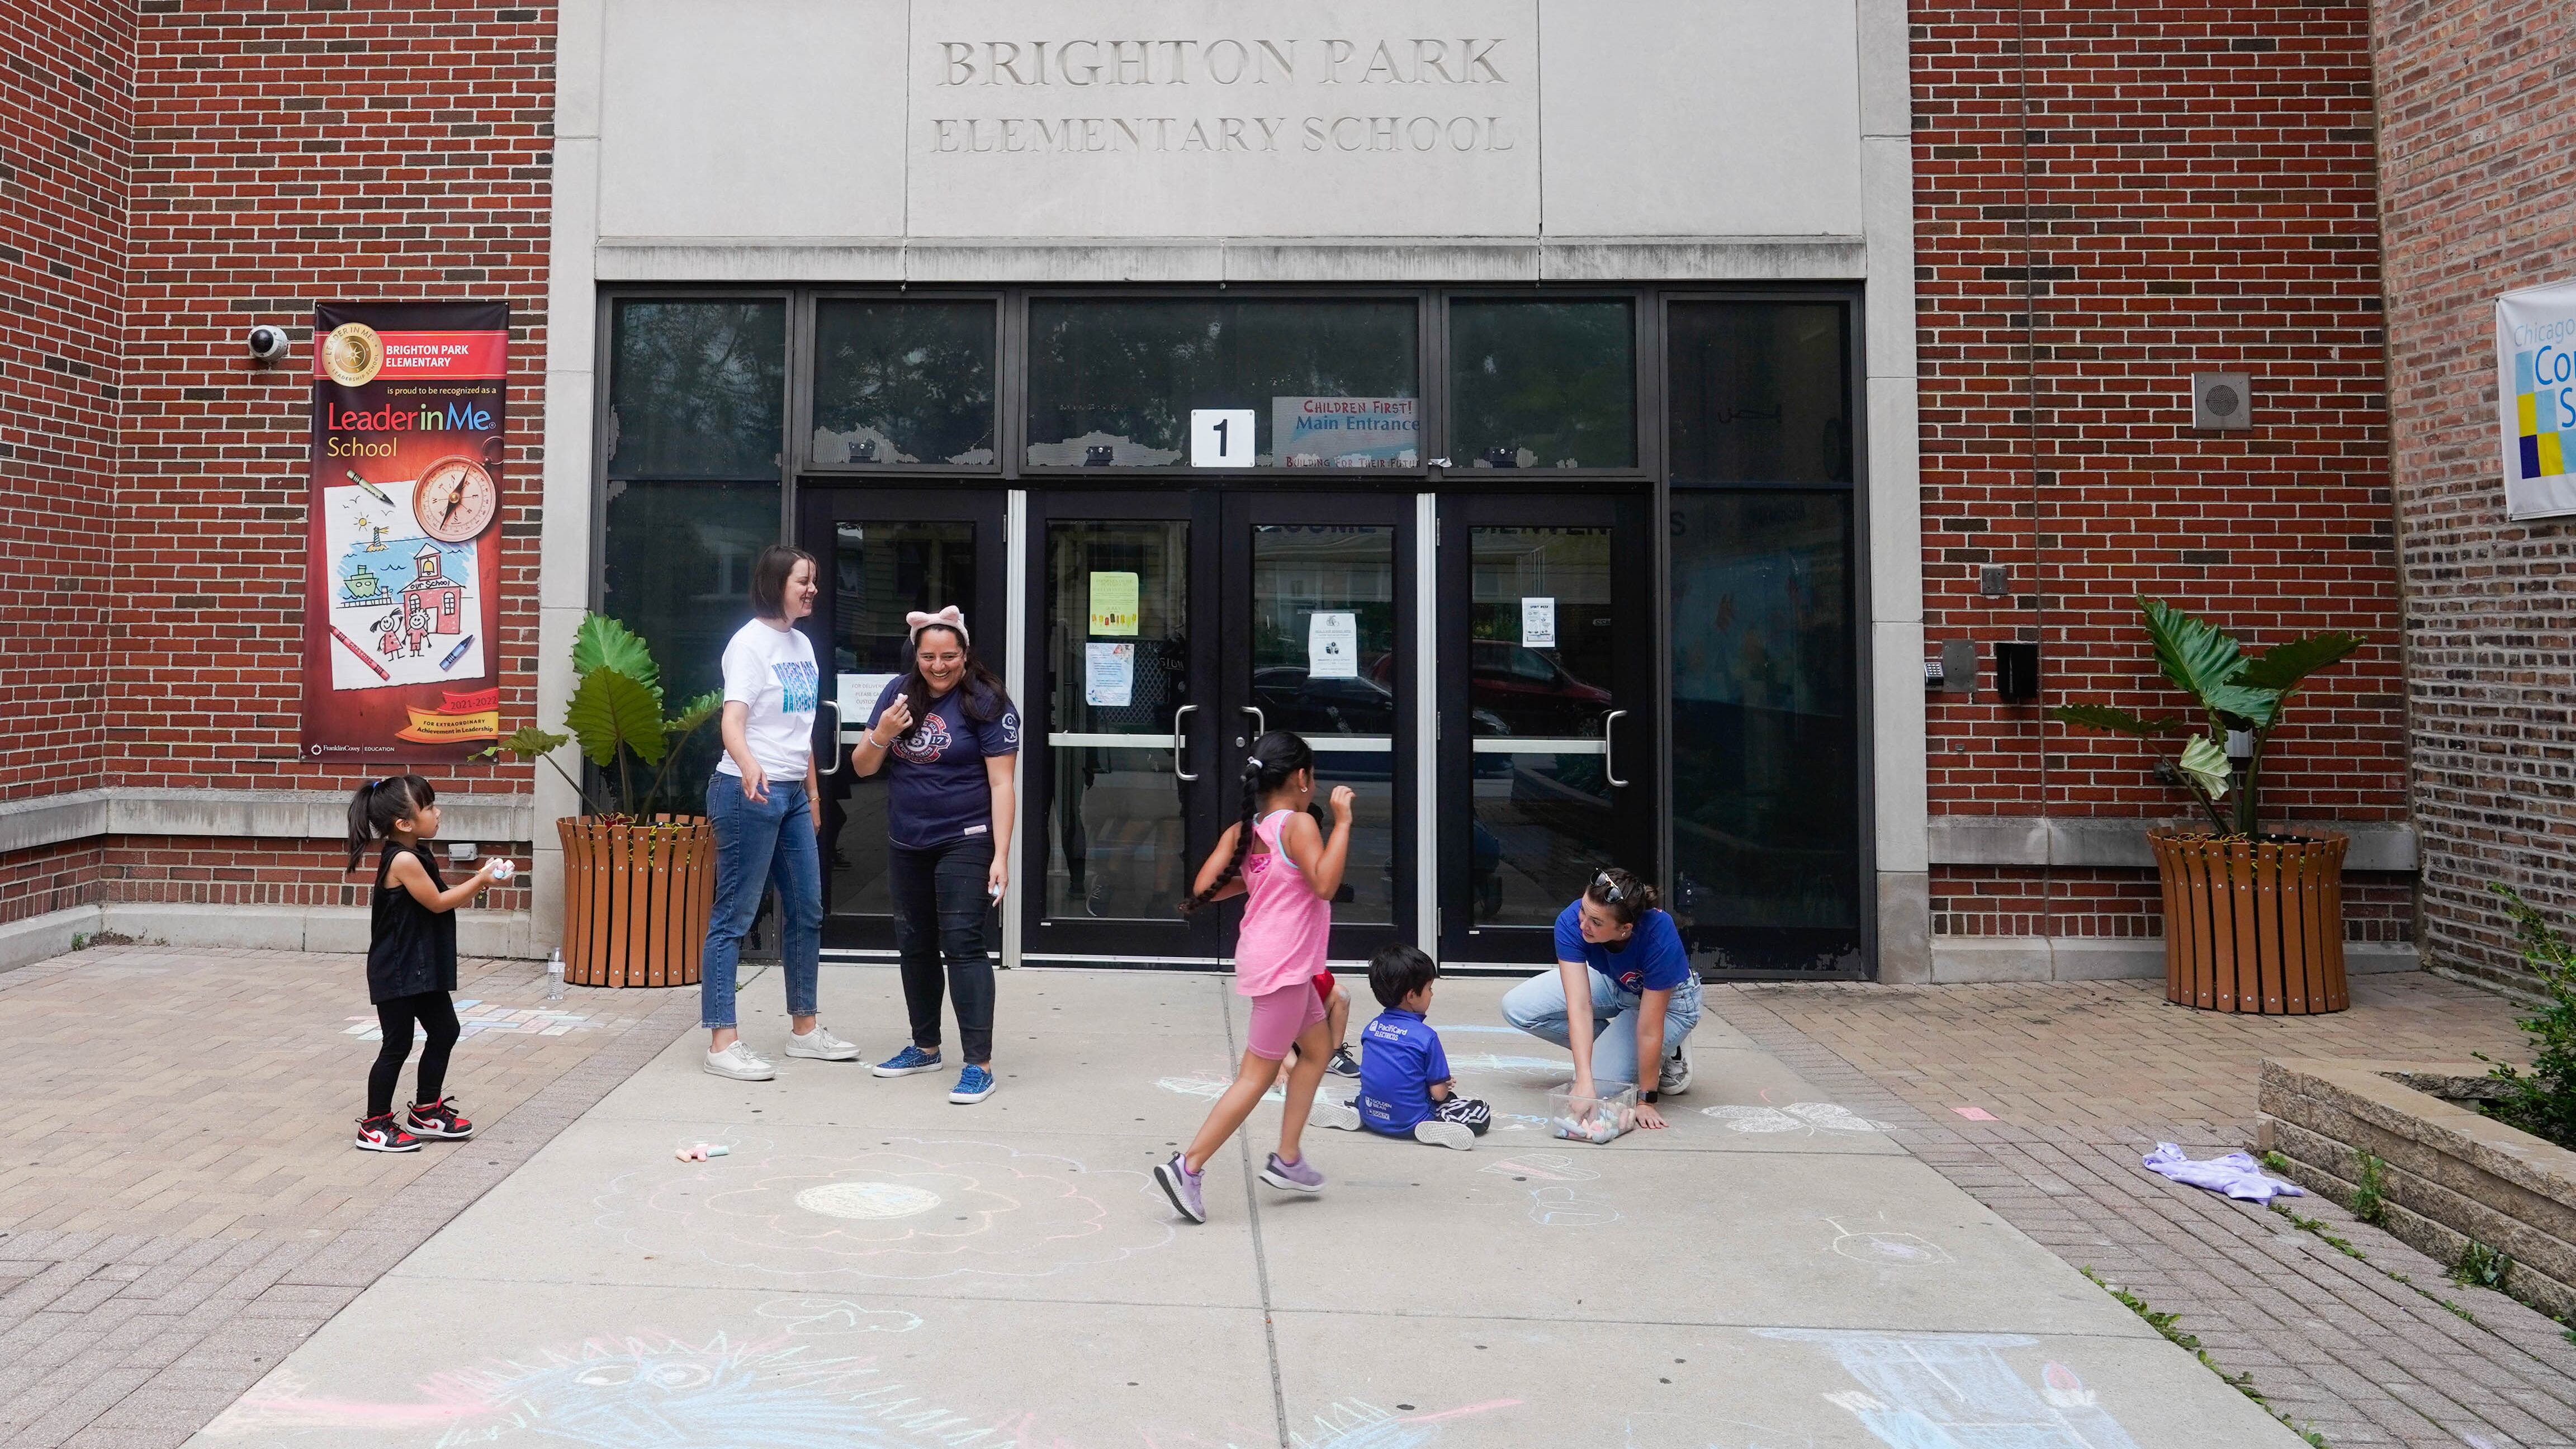 Students and teacher play in front of Brighton Park Elementary School on the city’s south west side.